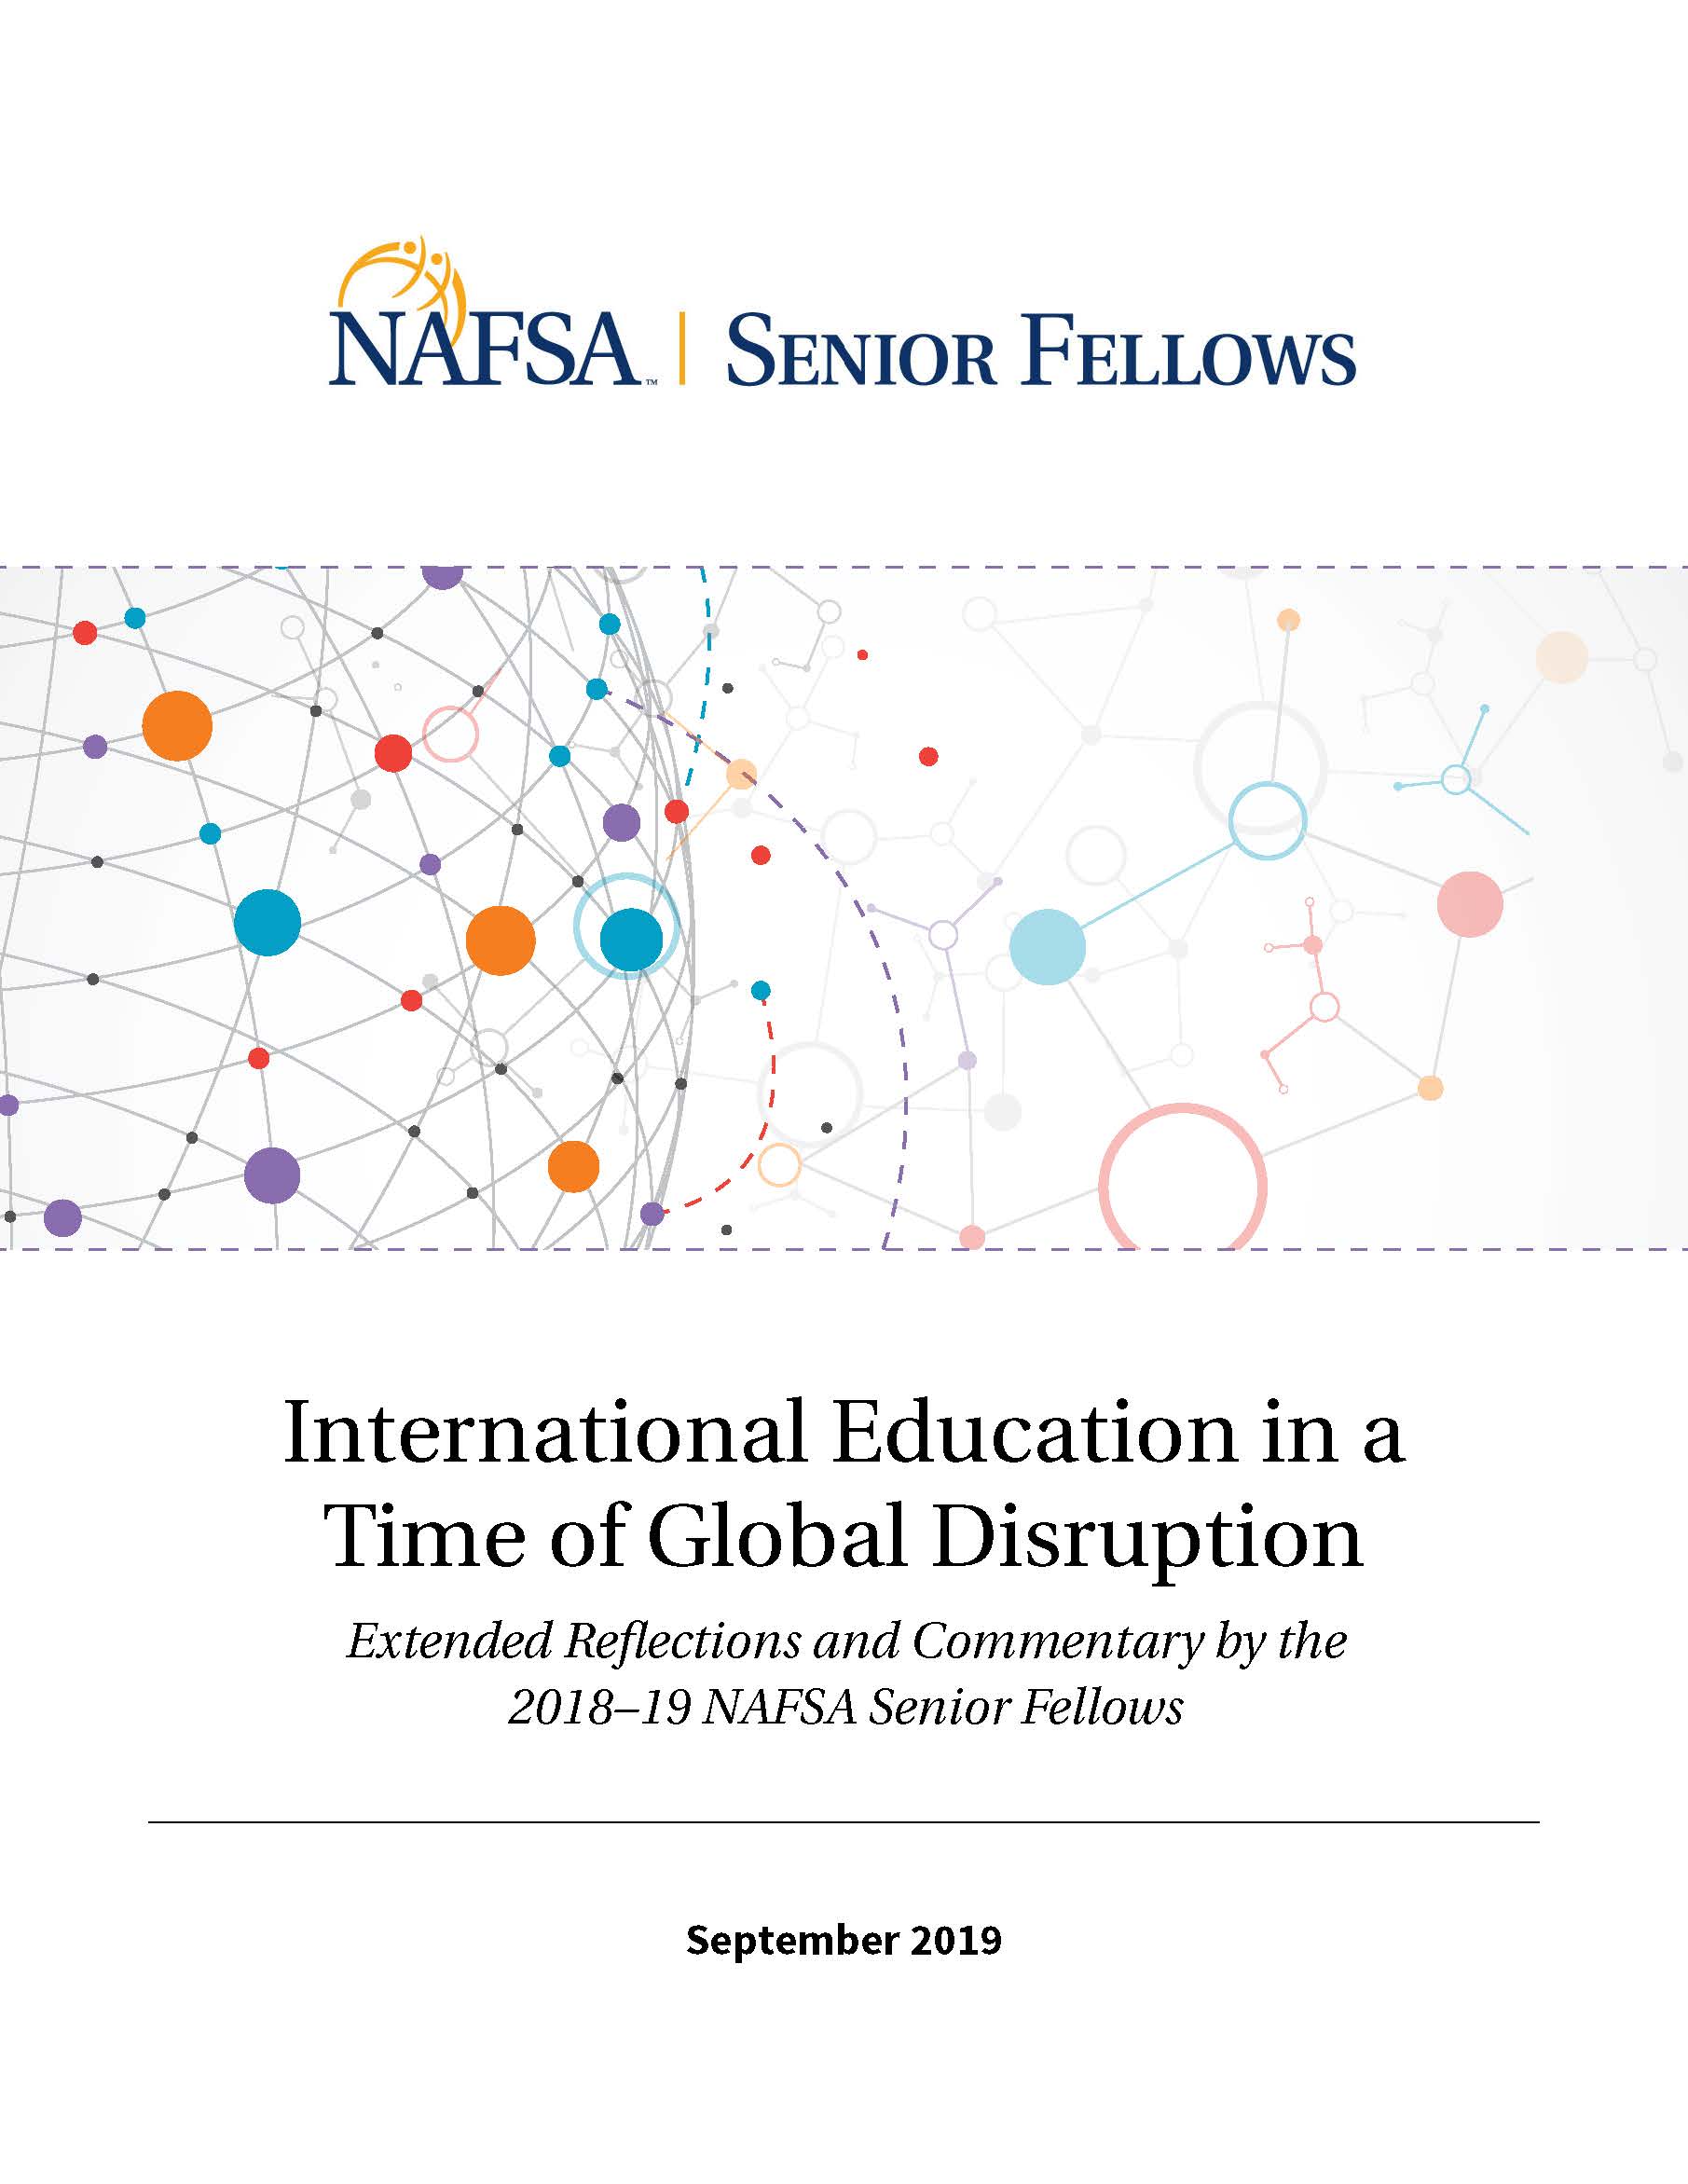 International education in a time of global disruption